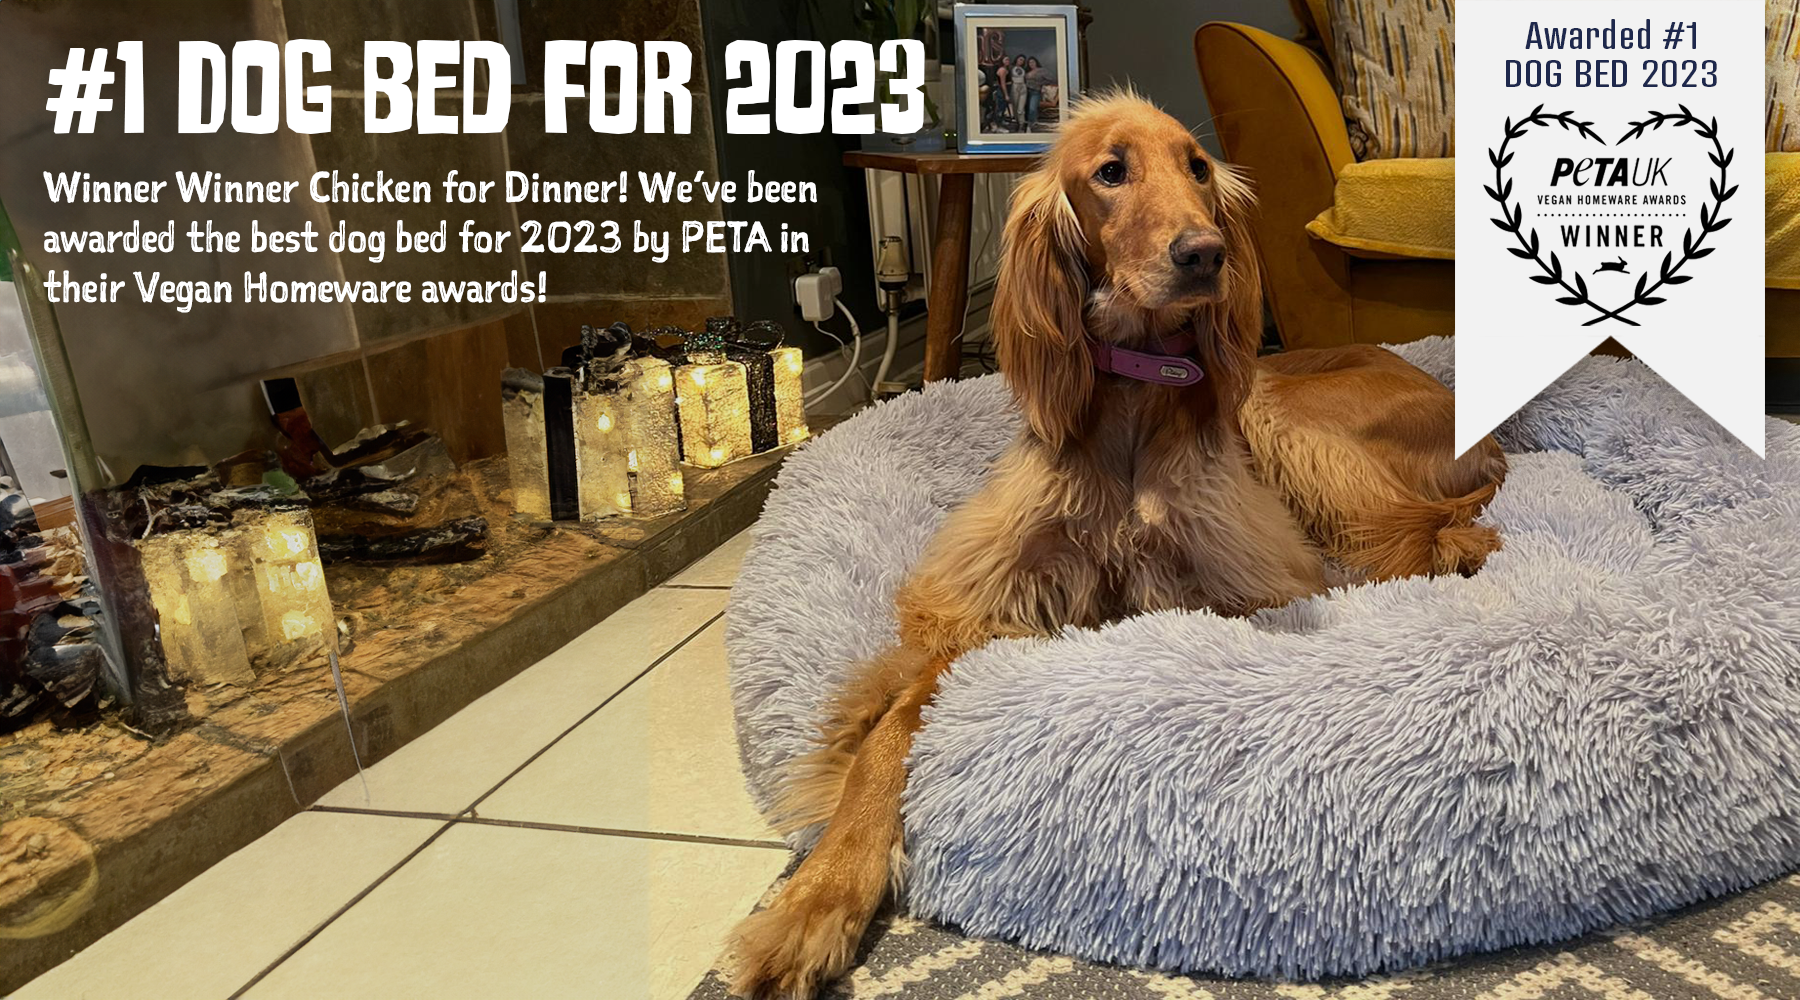 Awarded the Best Dog Bed for 2023!